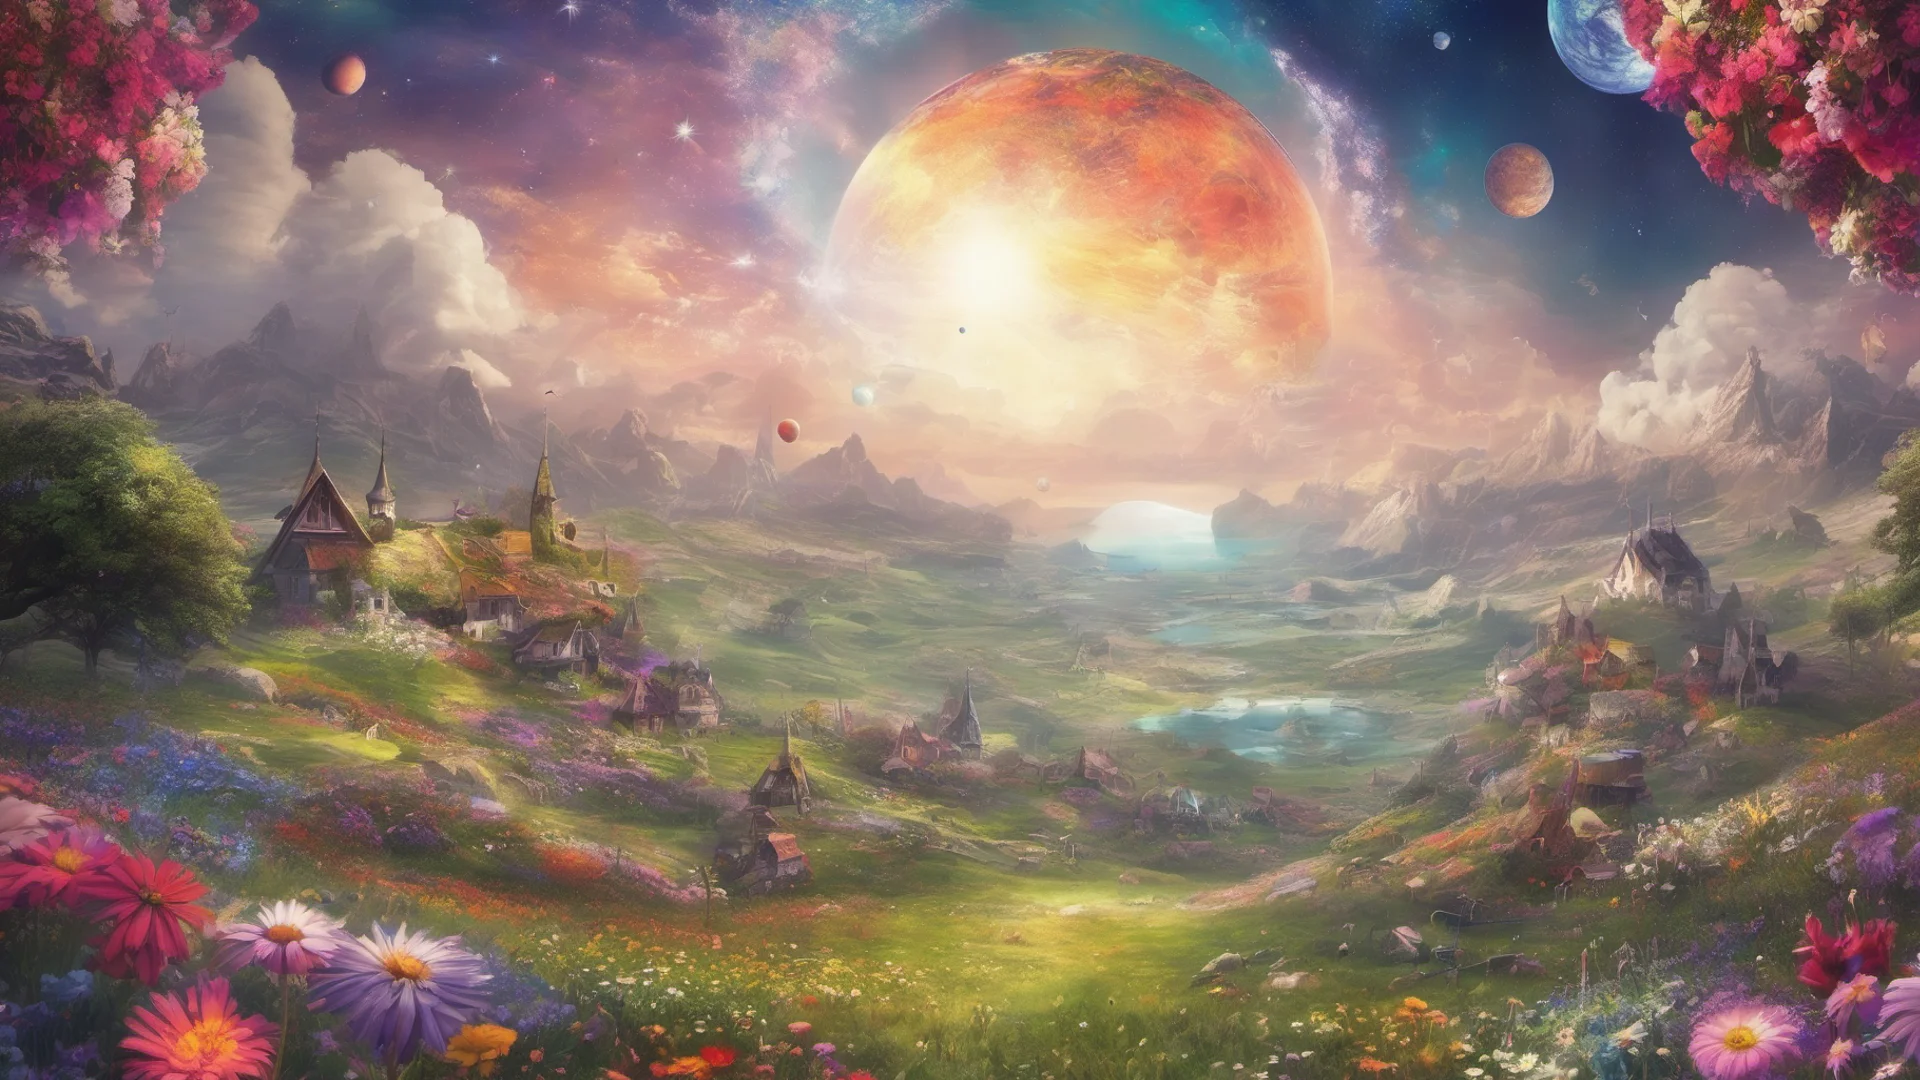 epic fantasy background colorful flower meadows village covered in flowers two saturn ringed planets overhead amazing awesome portrait 2 wide